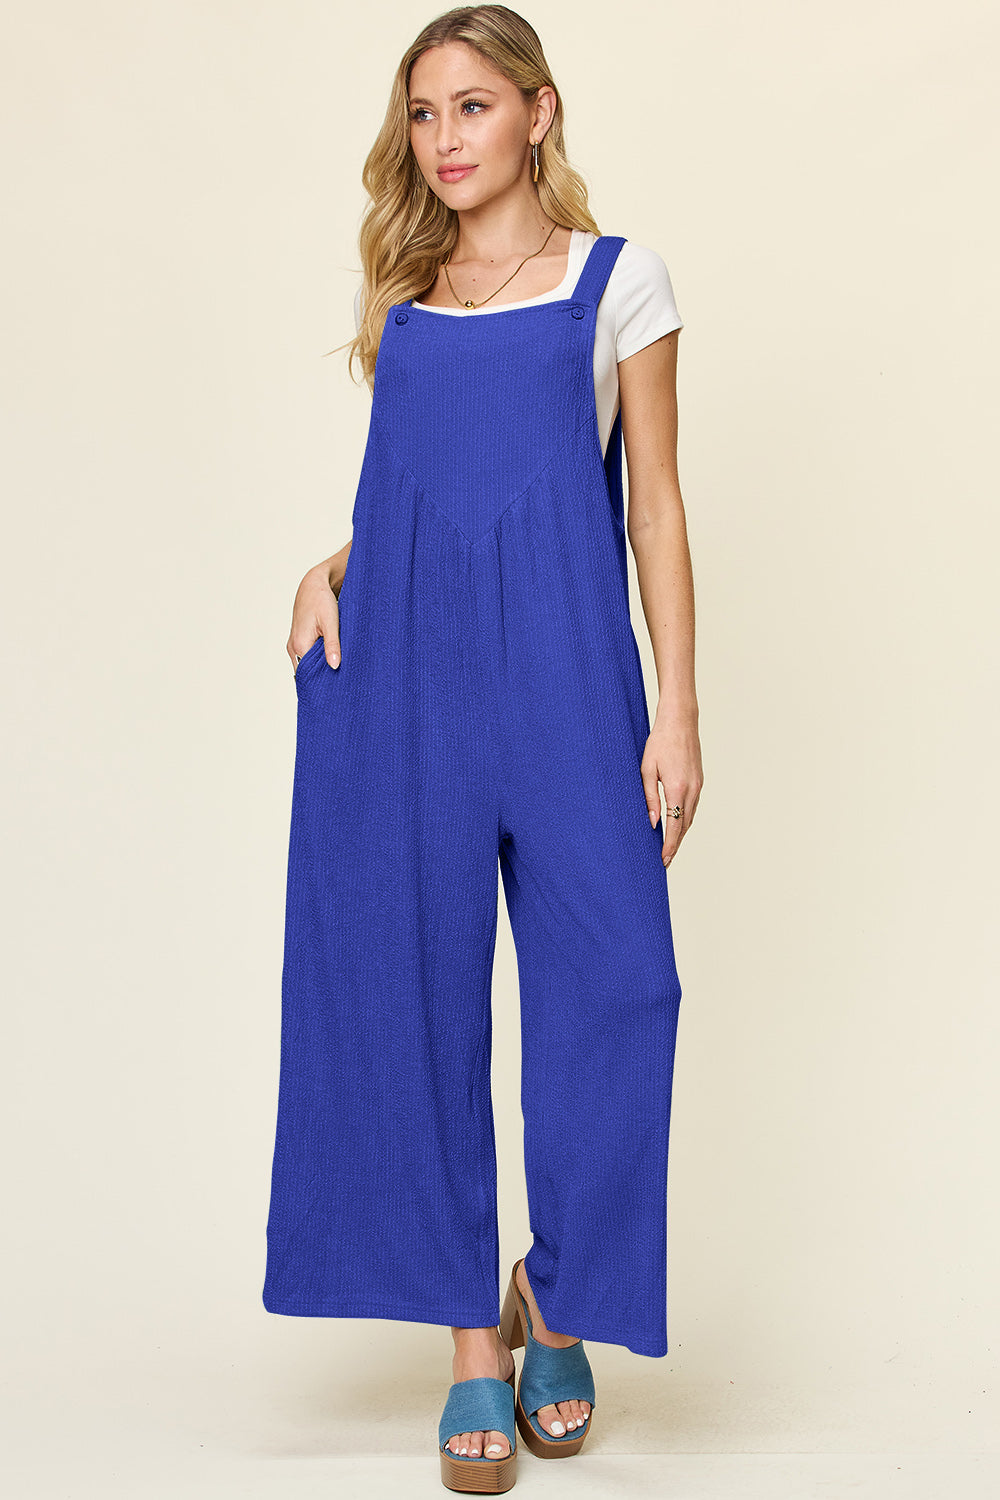 Double Take Texture Sleeveless Wide Leg Overall